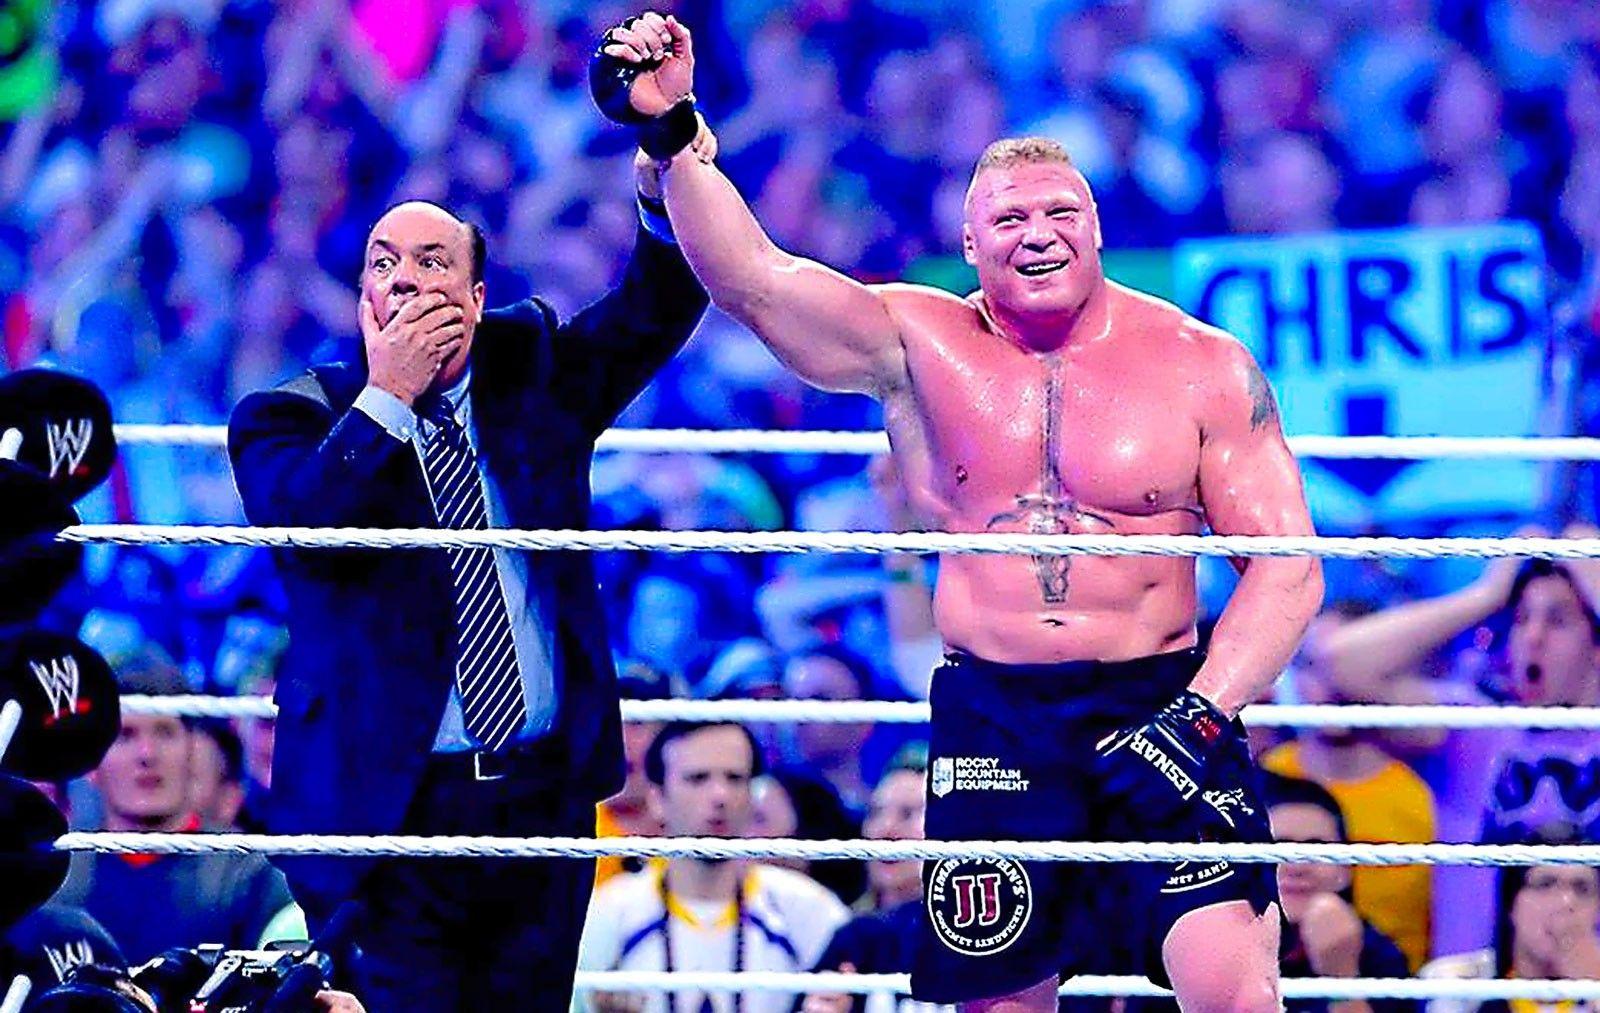 Latest Brock Lesnar Full HD Wallpaper&Picture And Wwe Champion